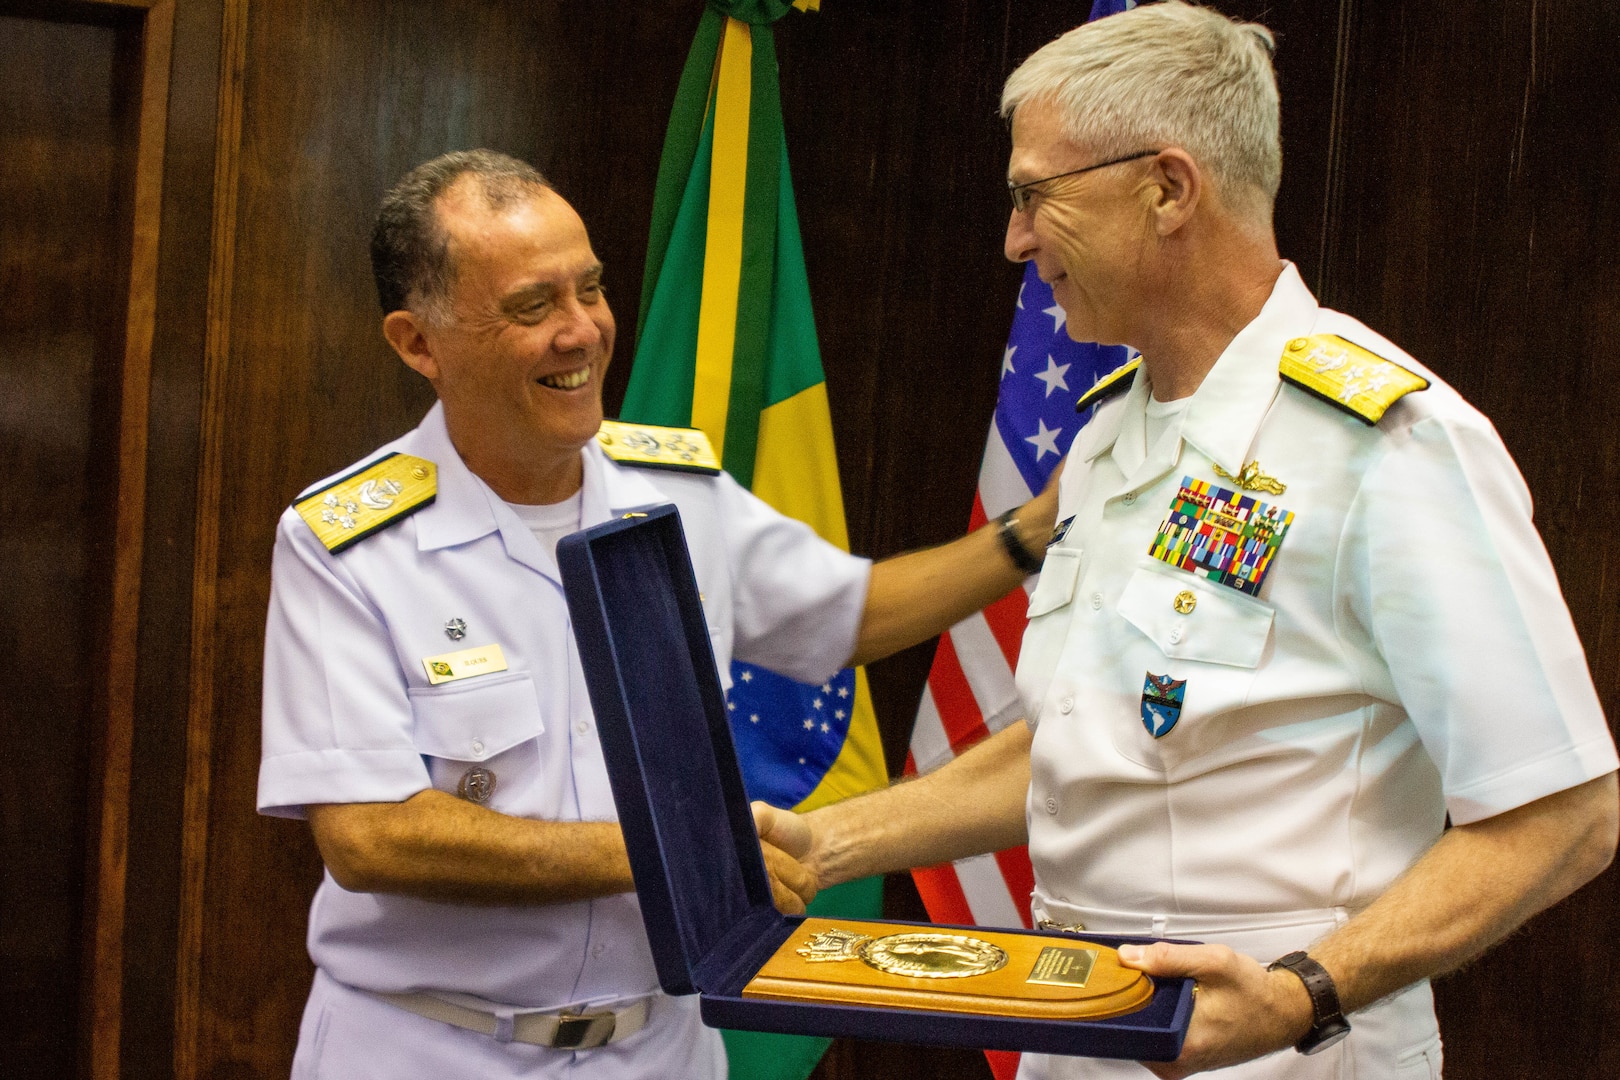 The commander of U.S. Southern Command, Navy Adm. Craig Faller, meets with Brazil's Chief of the Navy, Admiral Ilques Barbosa Júnior, in Brazil Feb. 11, 2019.